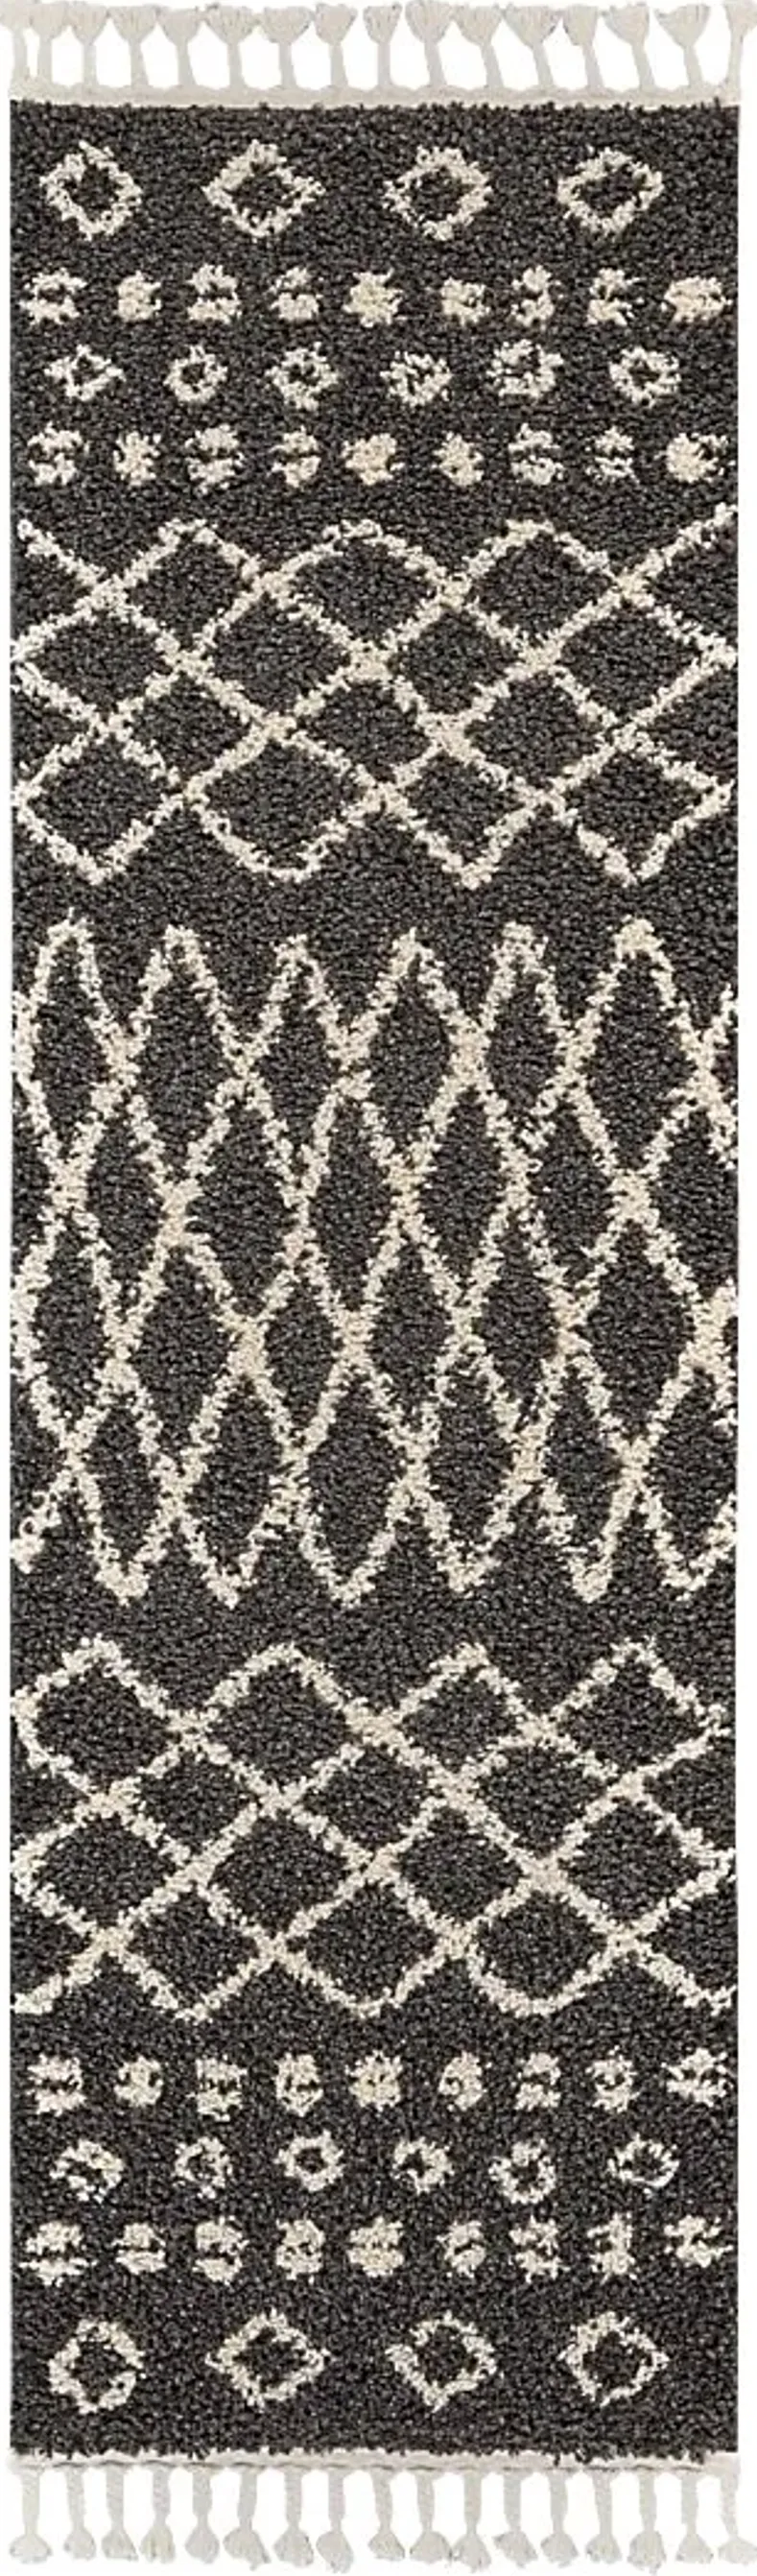 Graphic Patterns Charcoal 2'2 x 8'1 Runner Rug